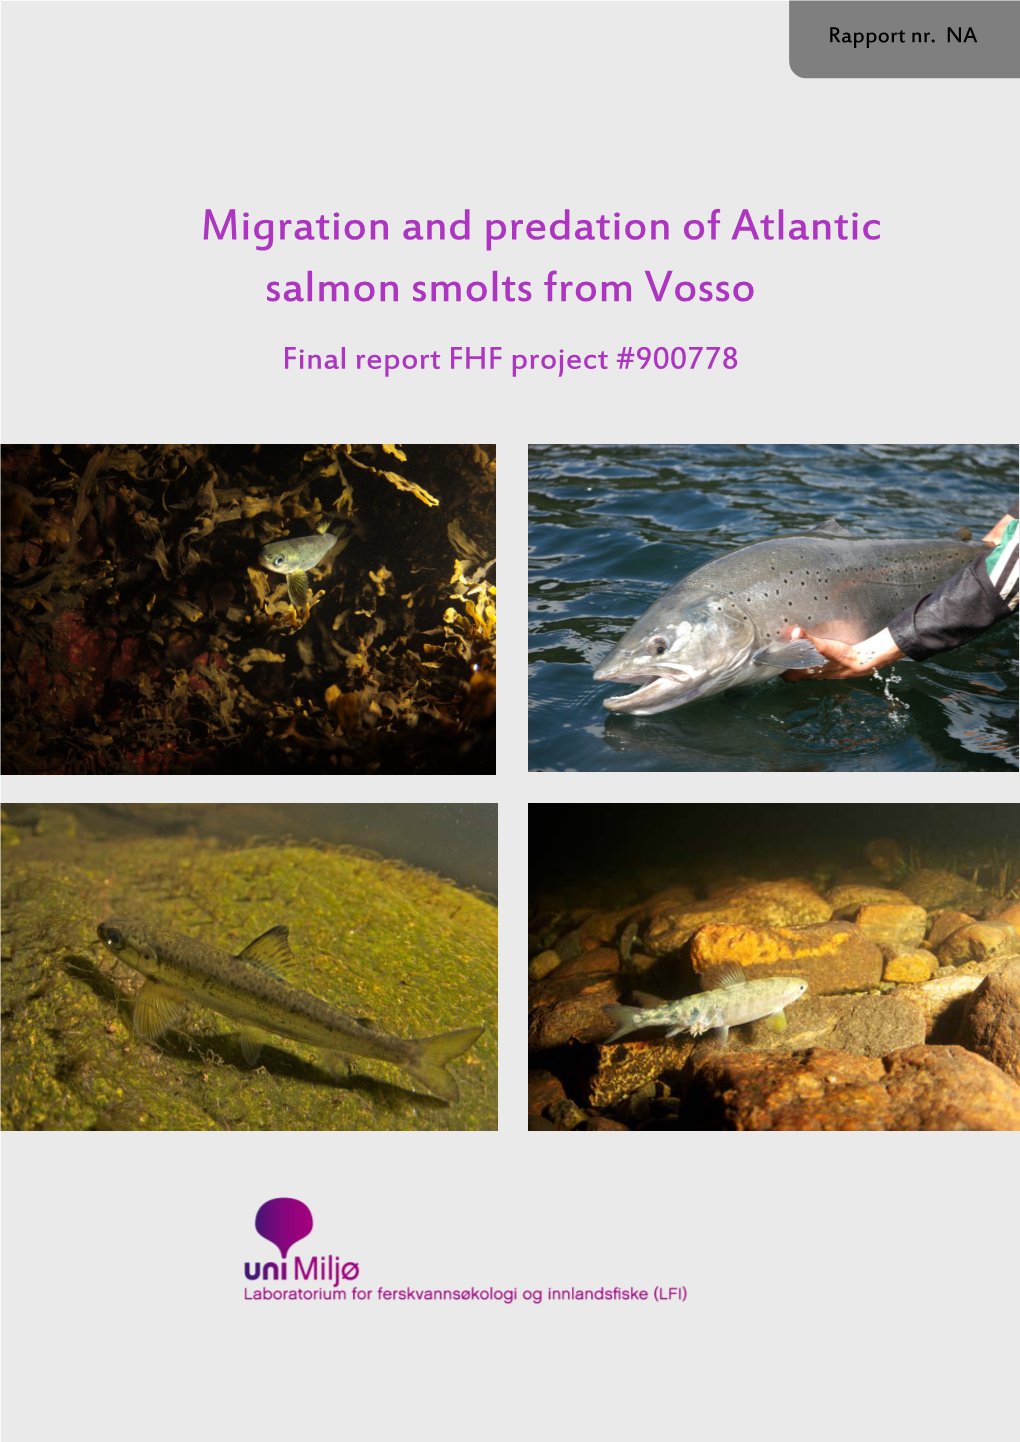 Migration and Predation of Atlantic Salmon Smolts from Vosso Final Report FHF Project #900778